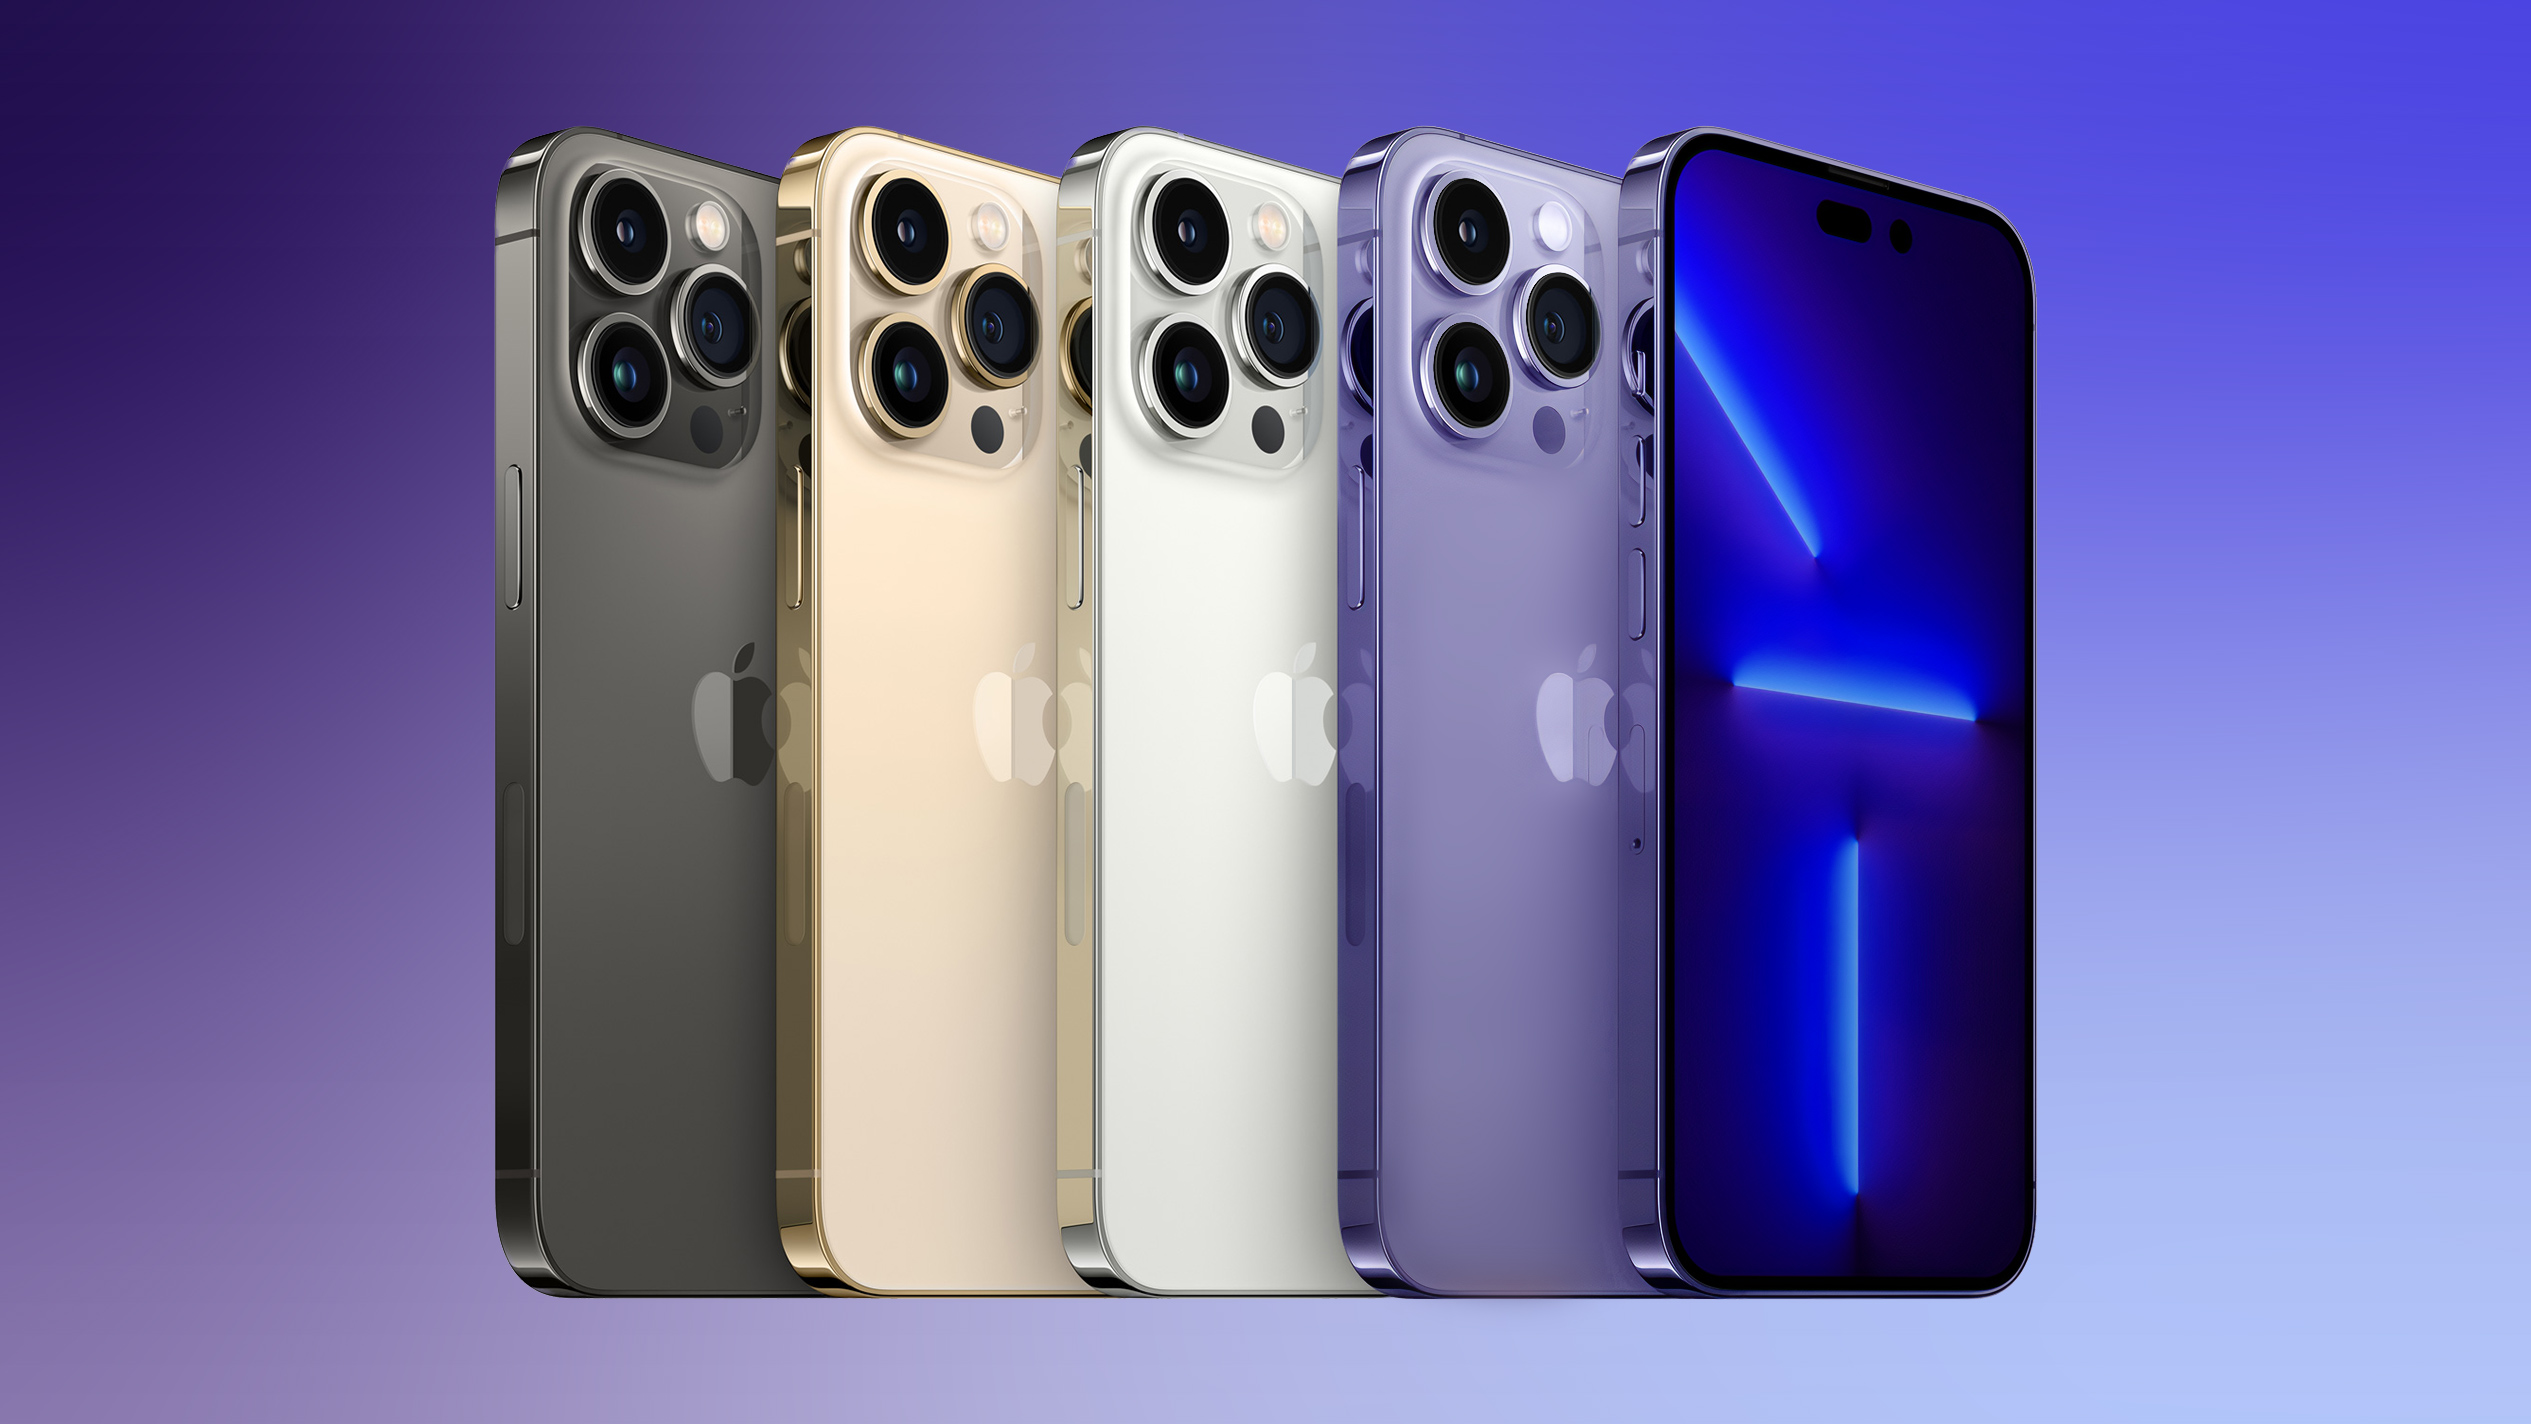 iPhone 14 Rumors: No Sierra Blue, No Titanium Model, Stronger MagSafe Magnets, and More